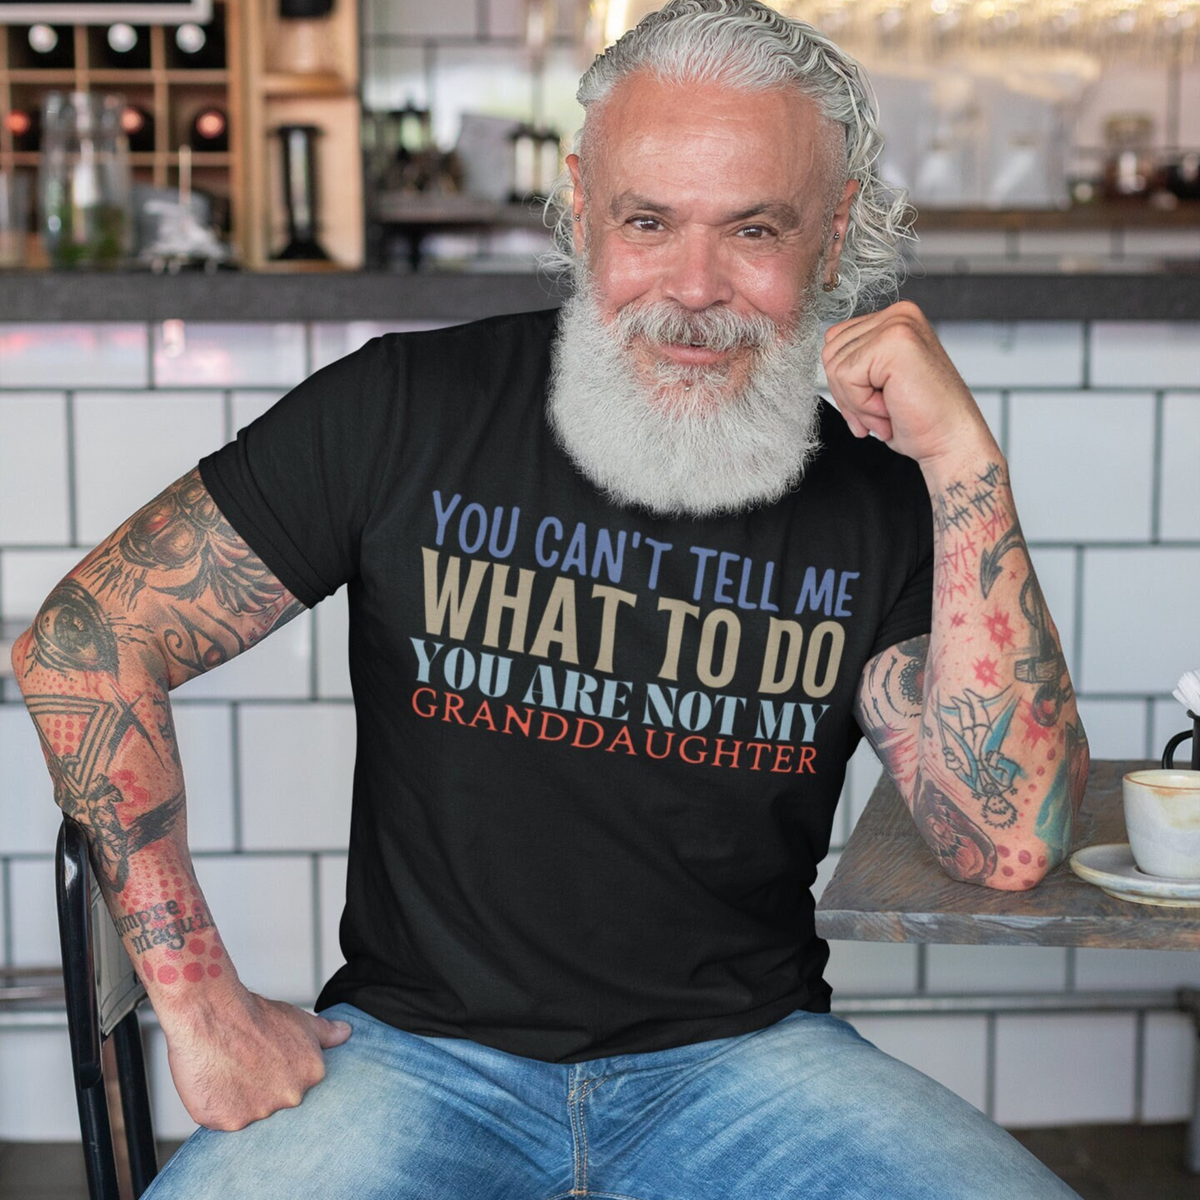 Granddad Shirt, Girl granddad shirt, Fathers Day Shirt, Funny Mens Shirt, Funny Granddad Shirt, Tell me what to do, Gift for him, Gift for her, New Papa Gift, Funny grandma Shirt, grandmother Shirt, New grandfather Shirt, granddaddy Shirt, papa tee, You Can't tell me What To Do You Are Not My granddaughter Shirt